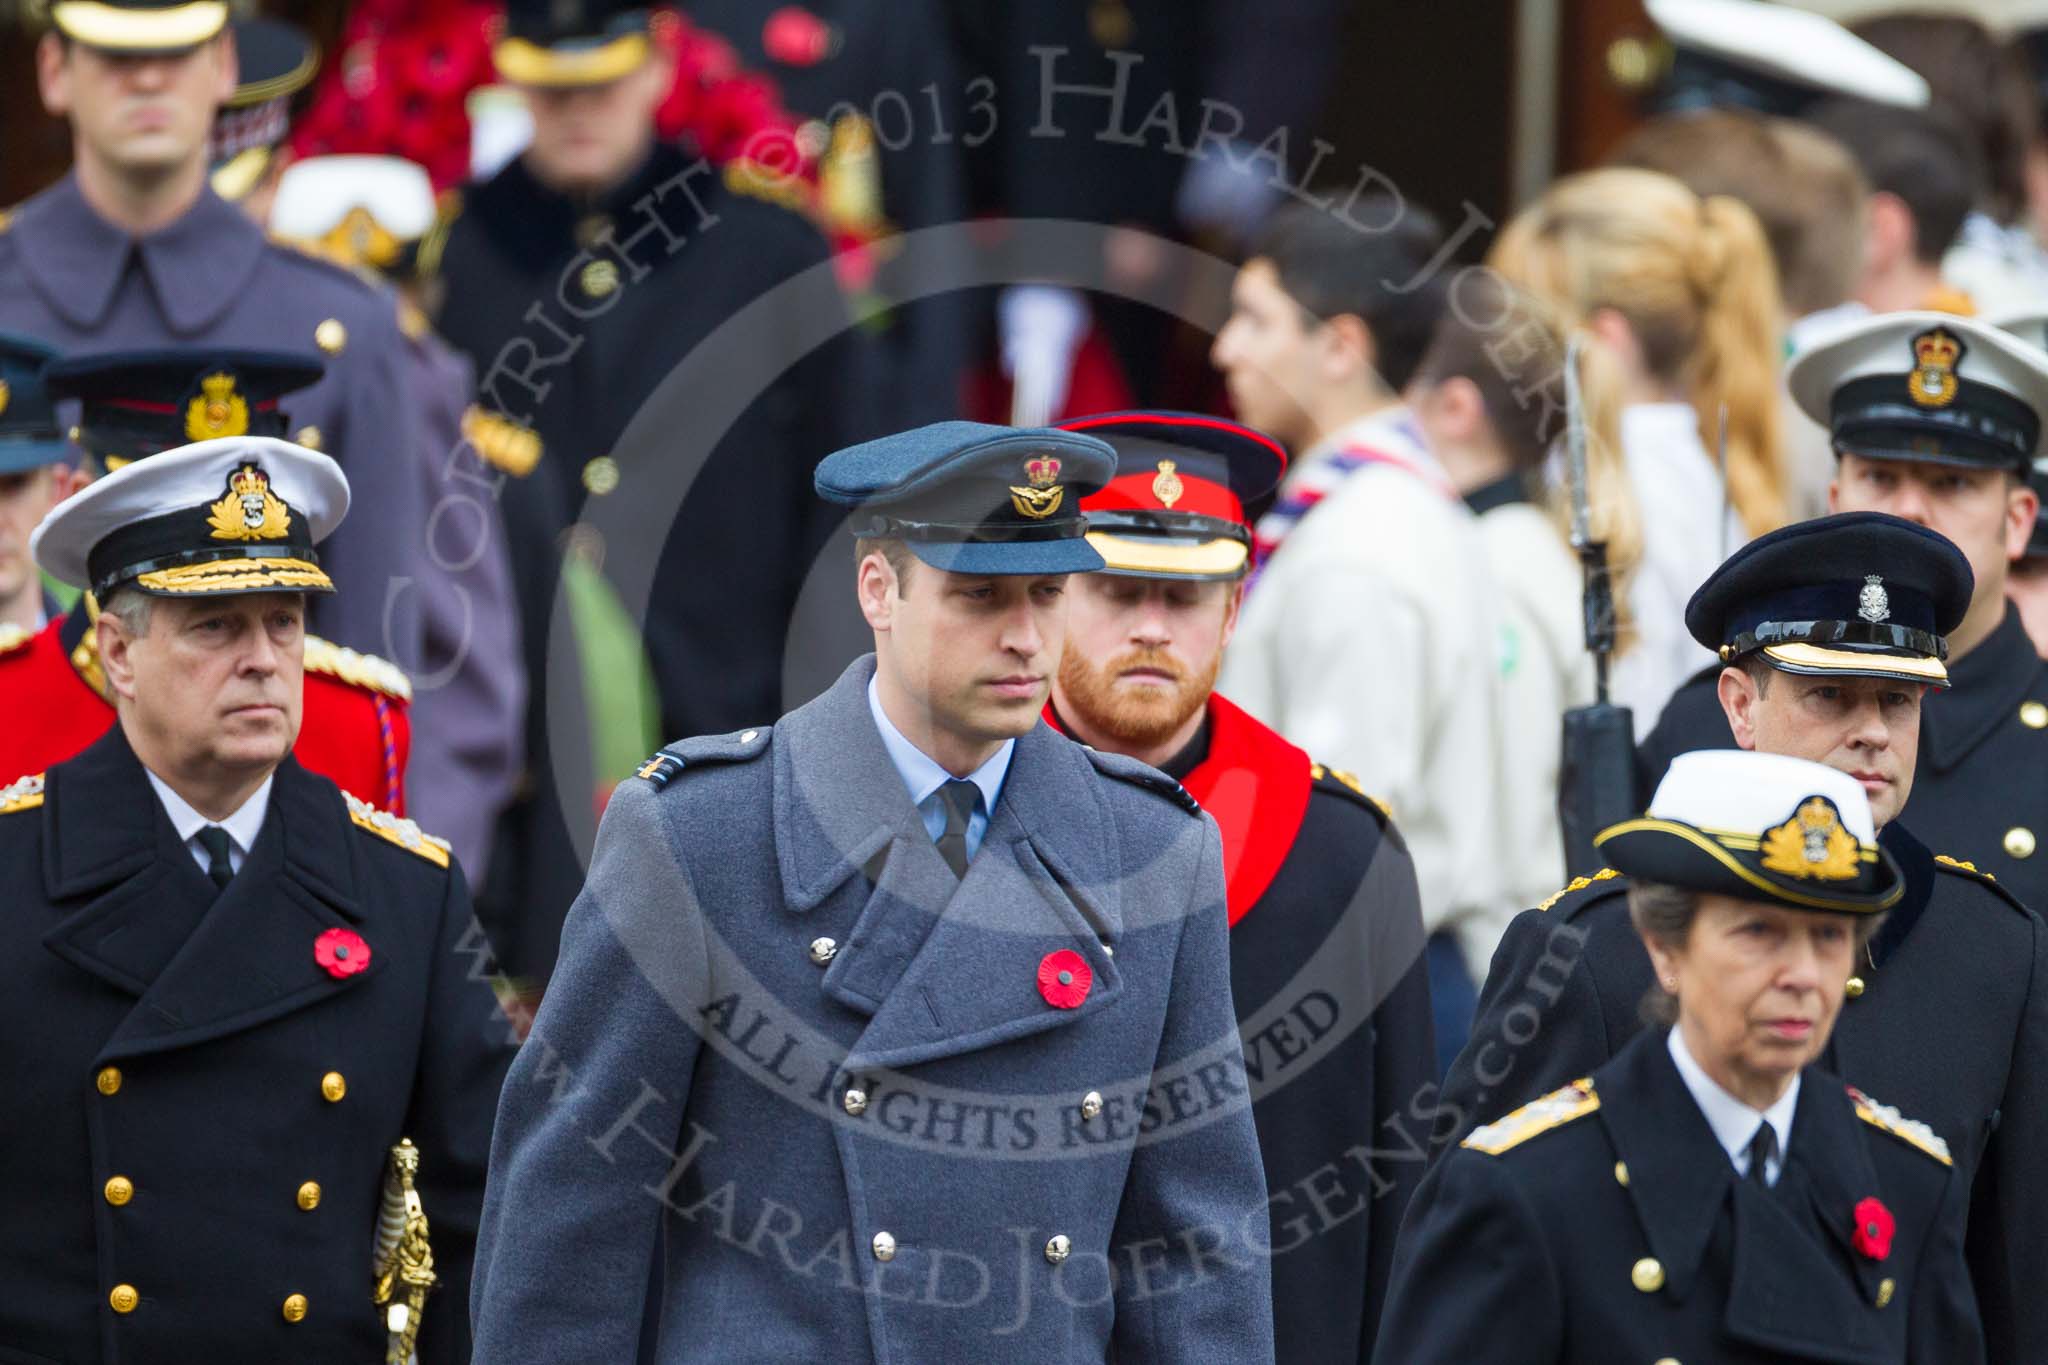 Remembrance Sunday at the Cenotaph 2015: Members of the Royal Family leaving the walking past the Cenotaph. Image #134, 08 November 2015 10:59 Whitehall, London, UK